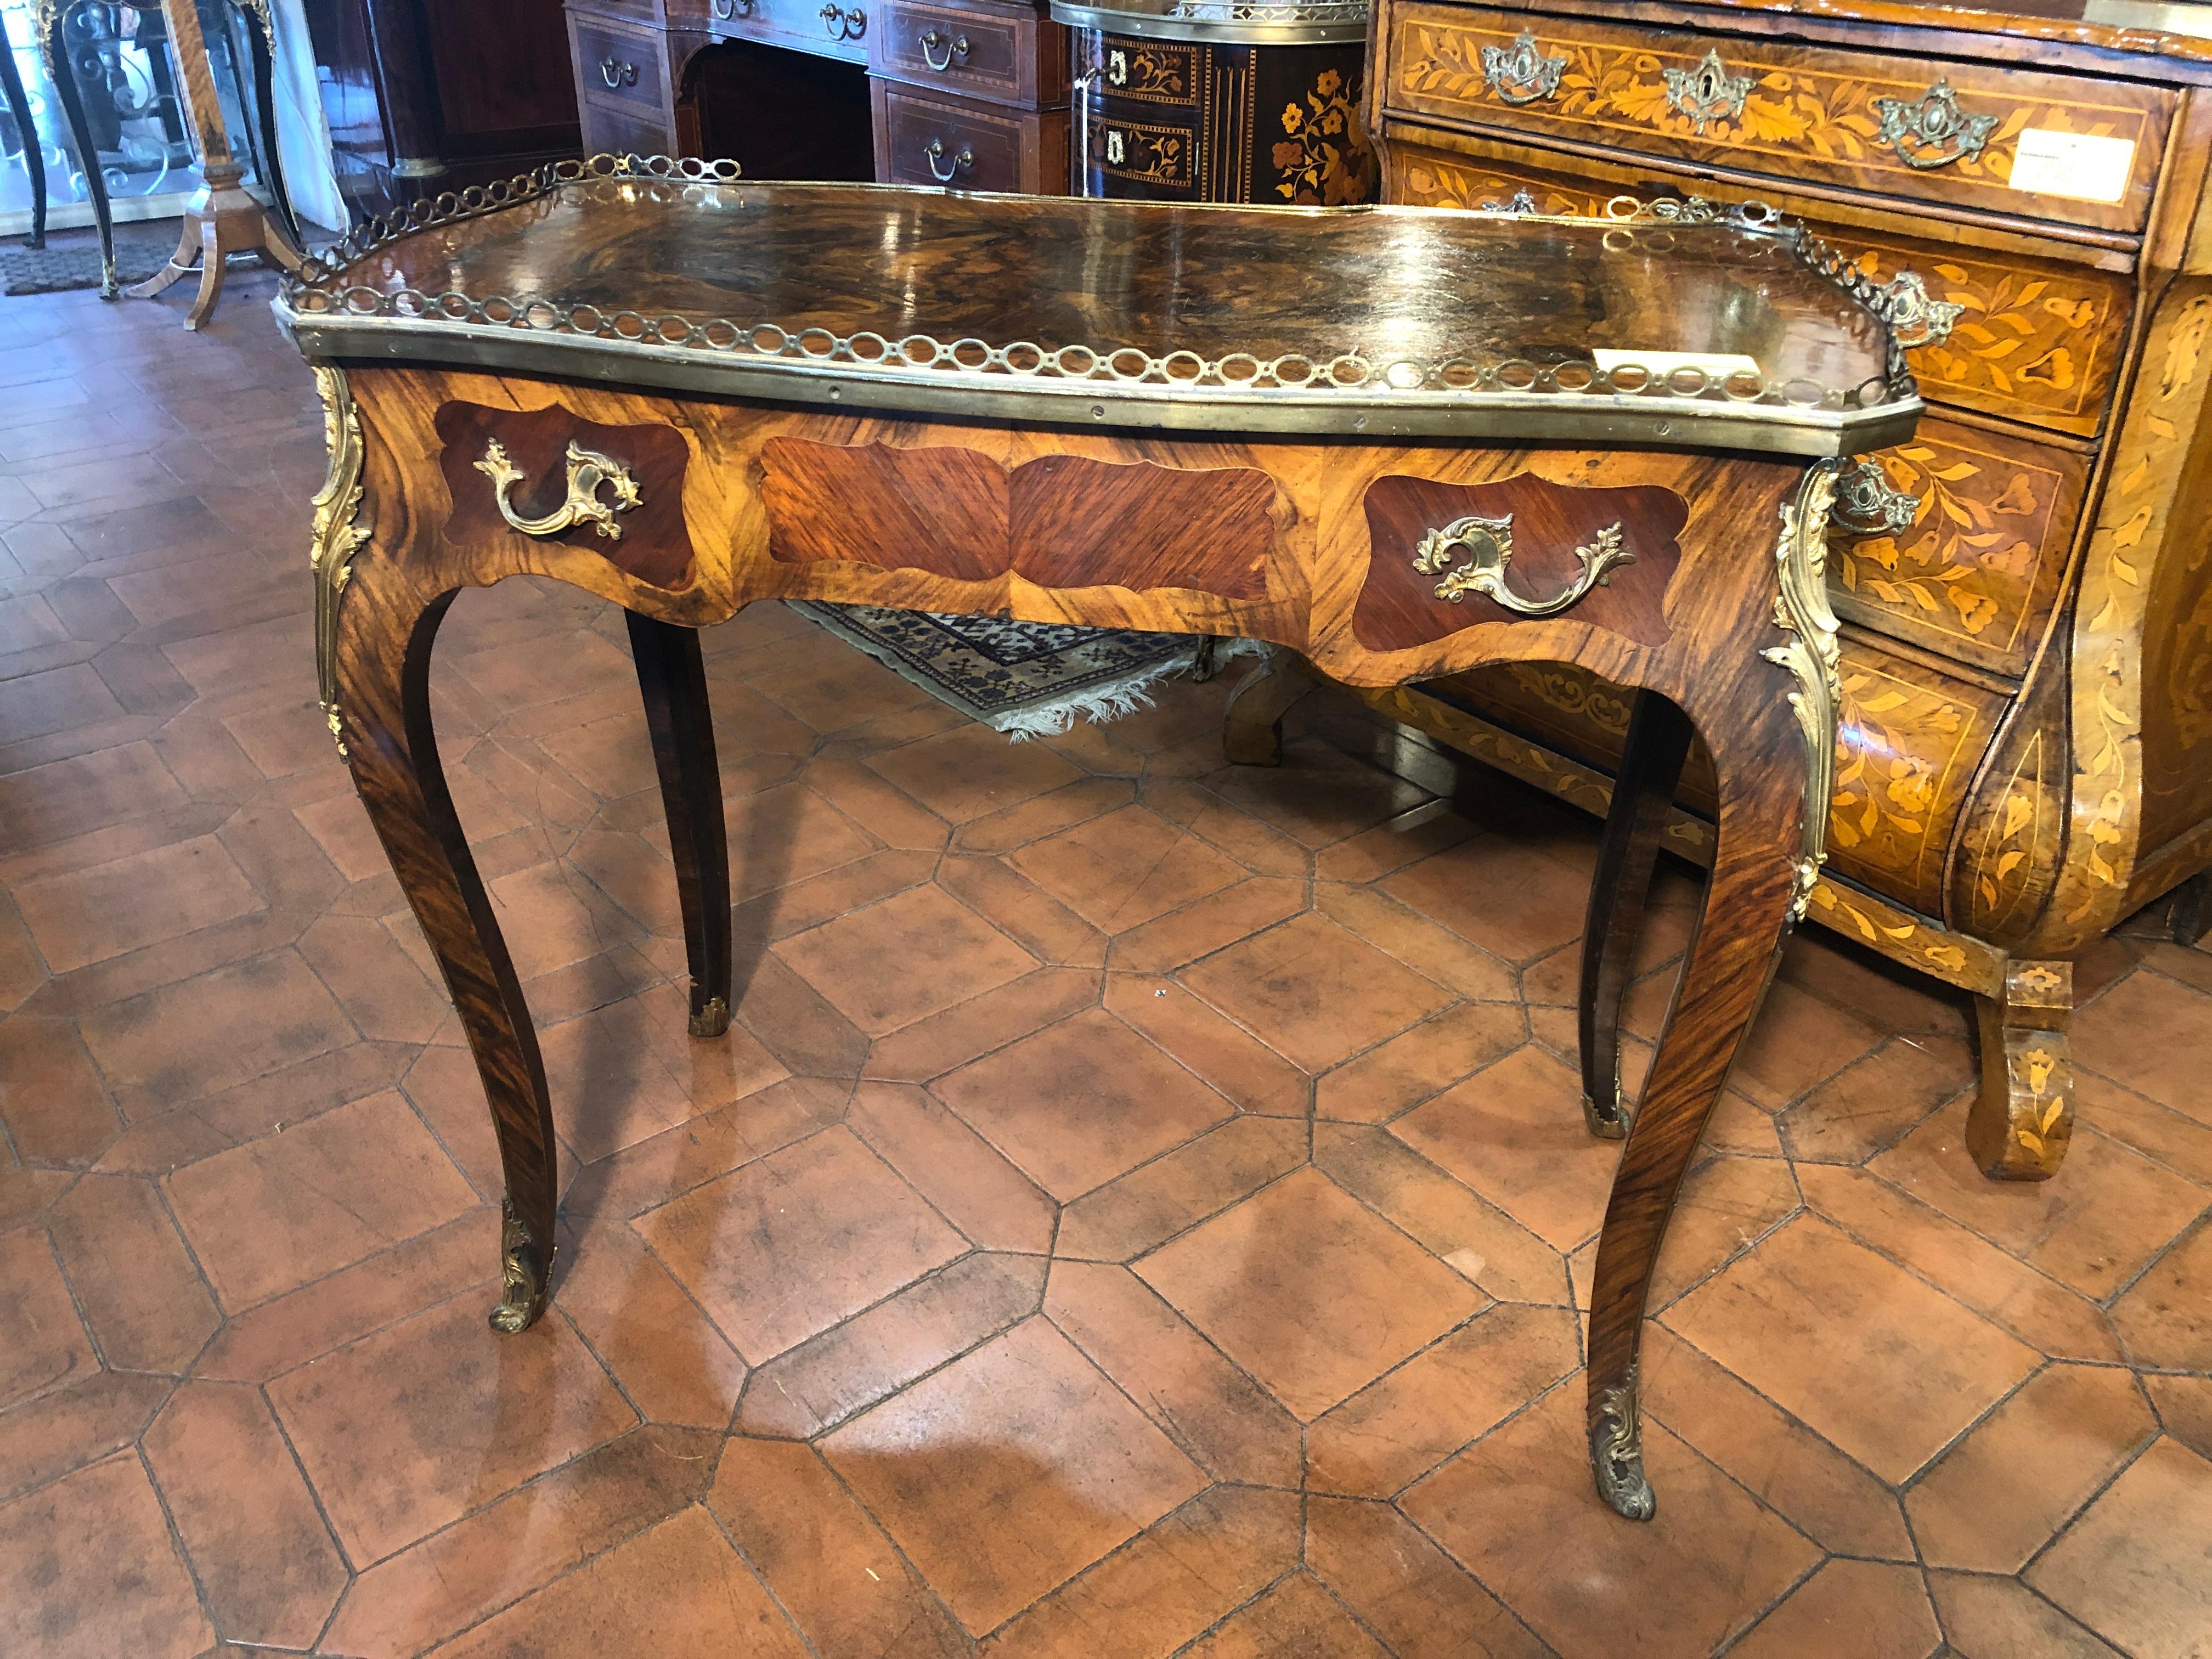 Small French writing desk, from the Napoleon III period, circa 1870. In walnut wood, Louis XV shapes, briarwood and boxwood thread. Bronzes, of excellent quality, coeval to the piece of furniture. Bronze railing that takes the entire edge of the